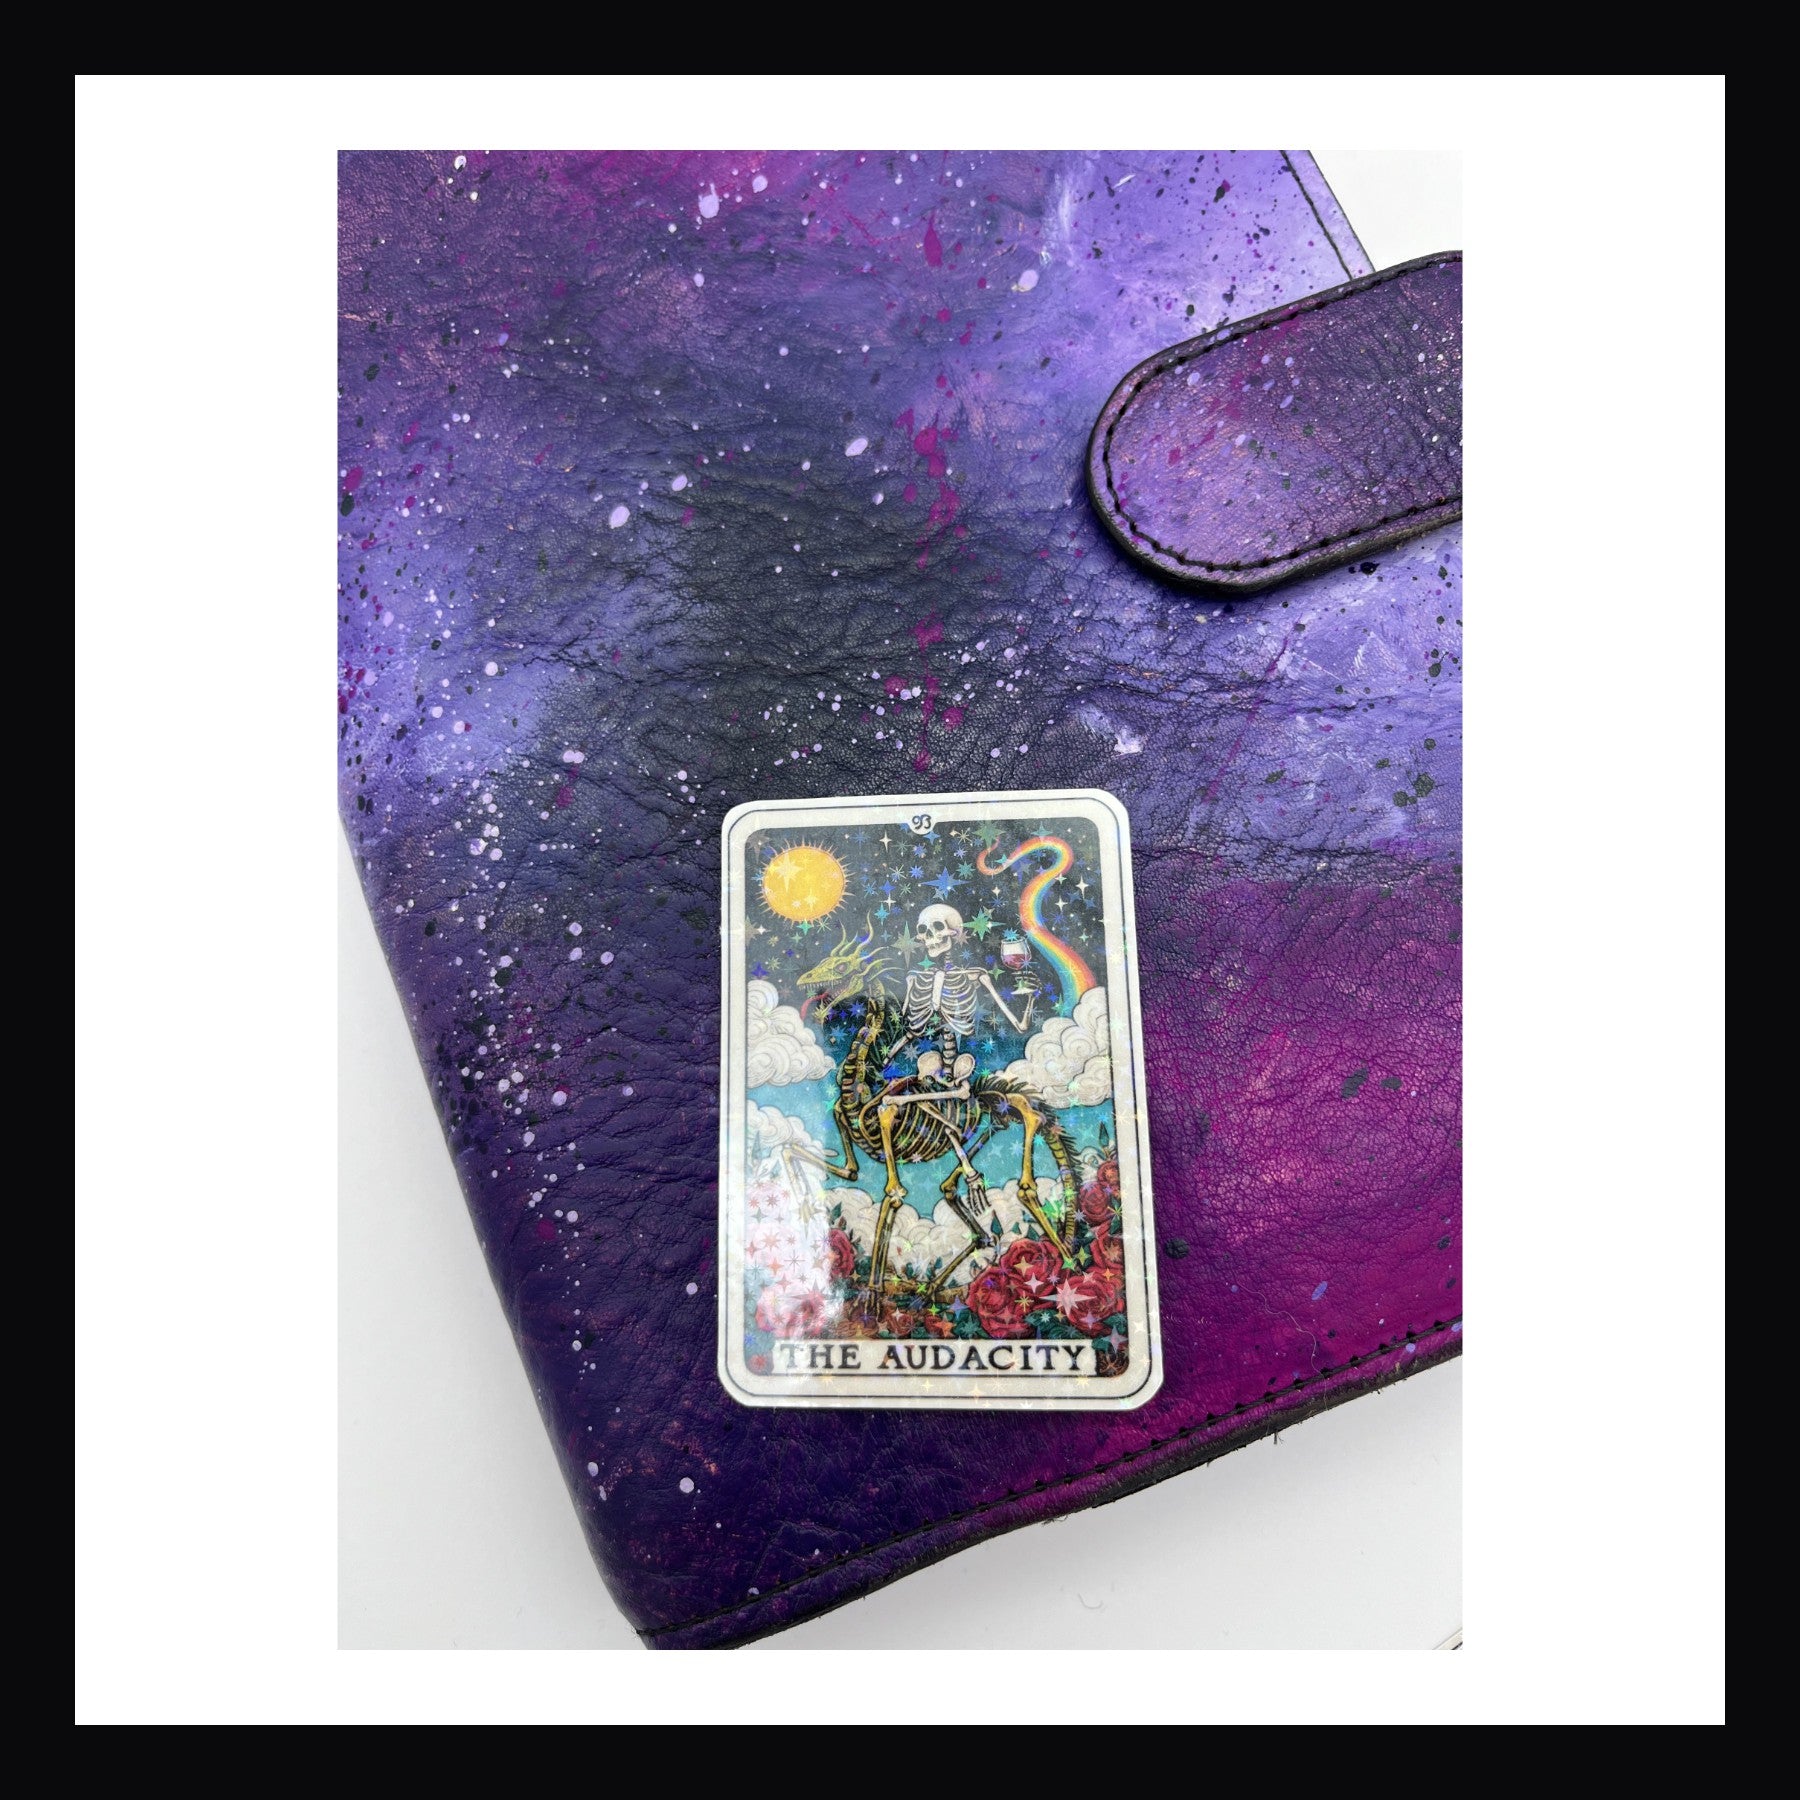 Alternative Tarot Die Cuts - The Audacity is a holographic die cut sticker featuring a skeleton  sitting on a skeletal horse, holding a cup of wine with rainbows in the background.